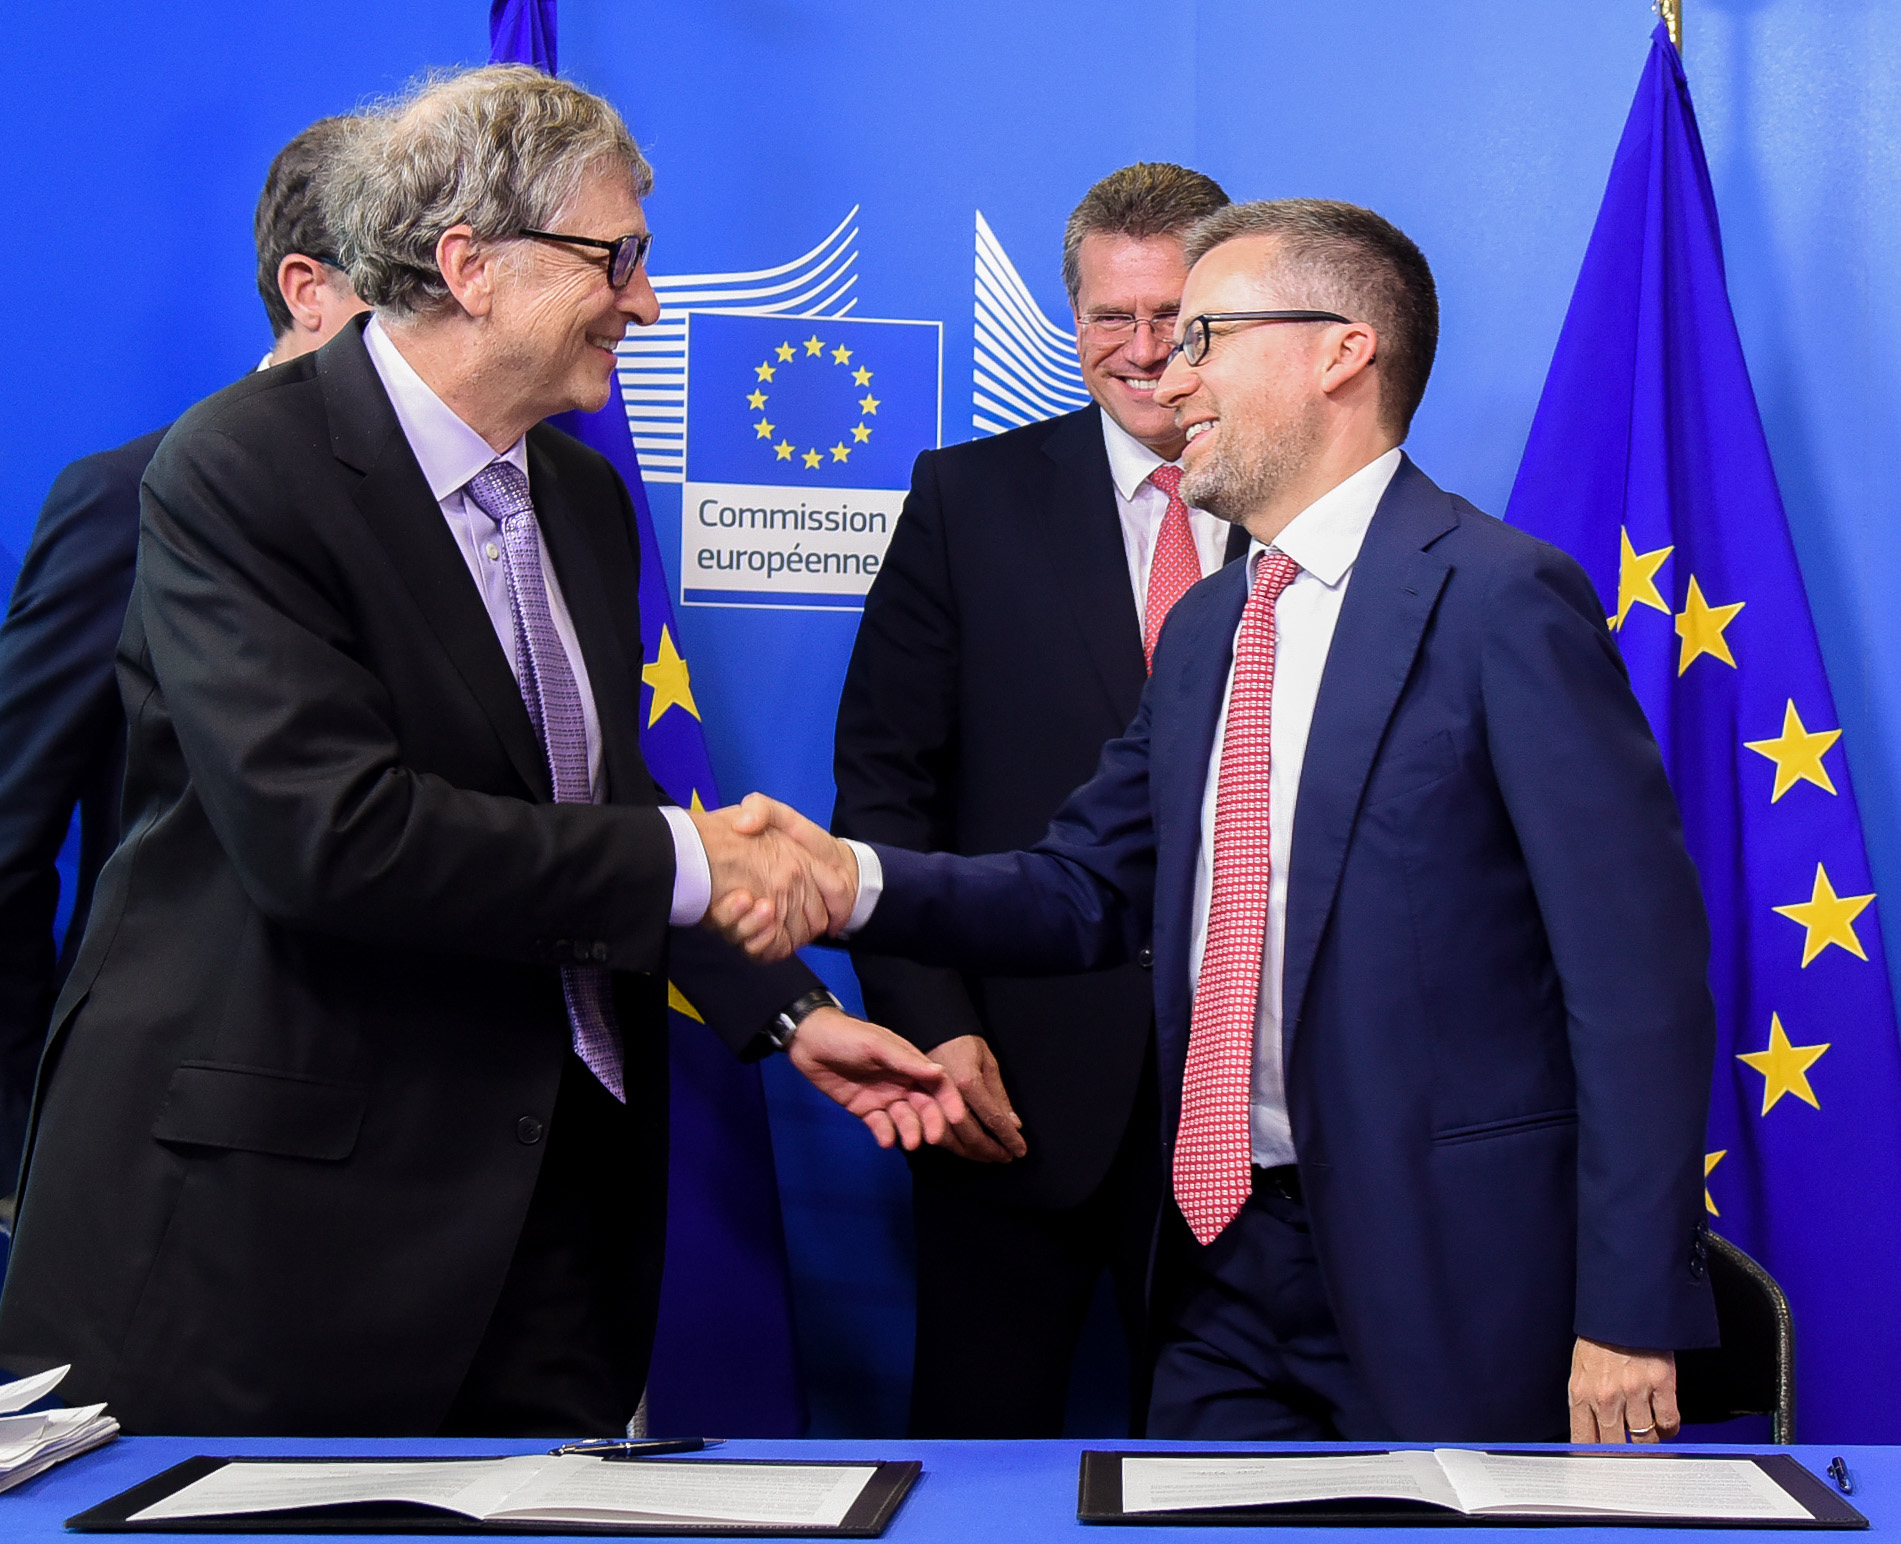 Bill Gates and Commissoner Carlos Moedas committed to establish a fund to get radical new clean energy technologies to market.